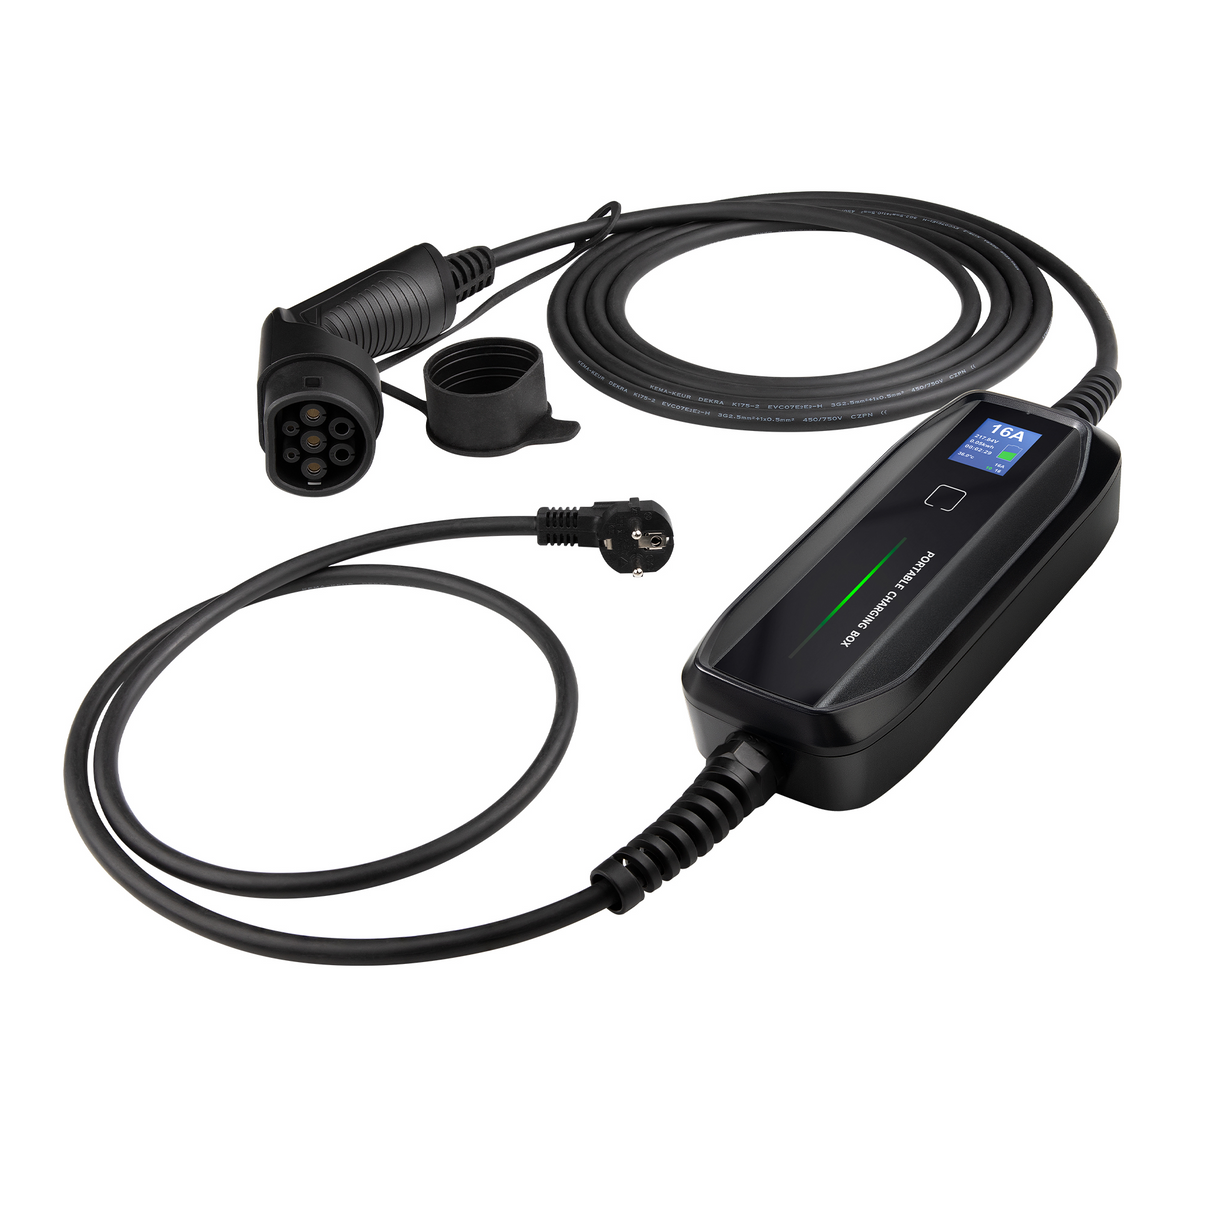 Mobile Charger Volkswagen e-Up! - Besen with LCD - Type 2 to Schuko